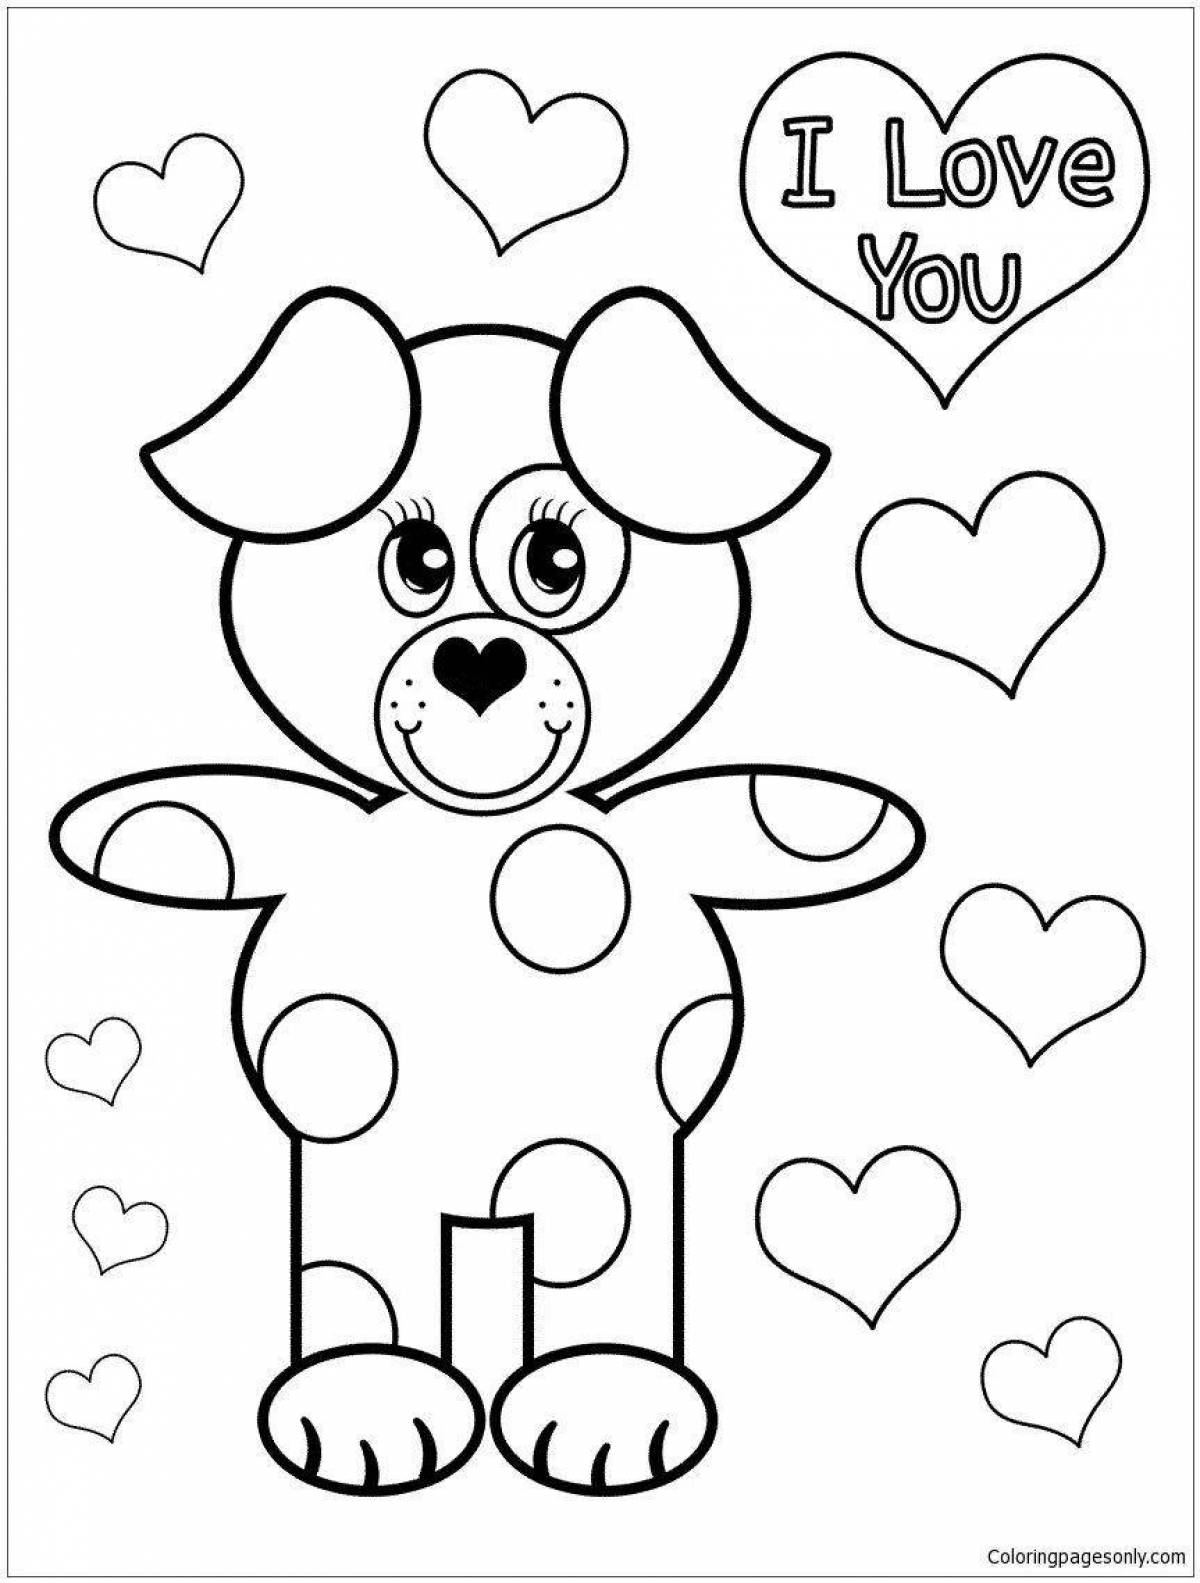 Cute valentine coloring pages for kids